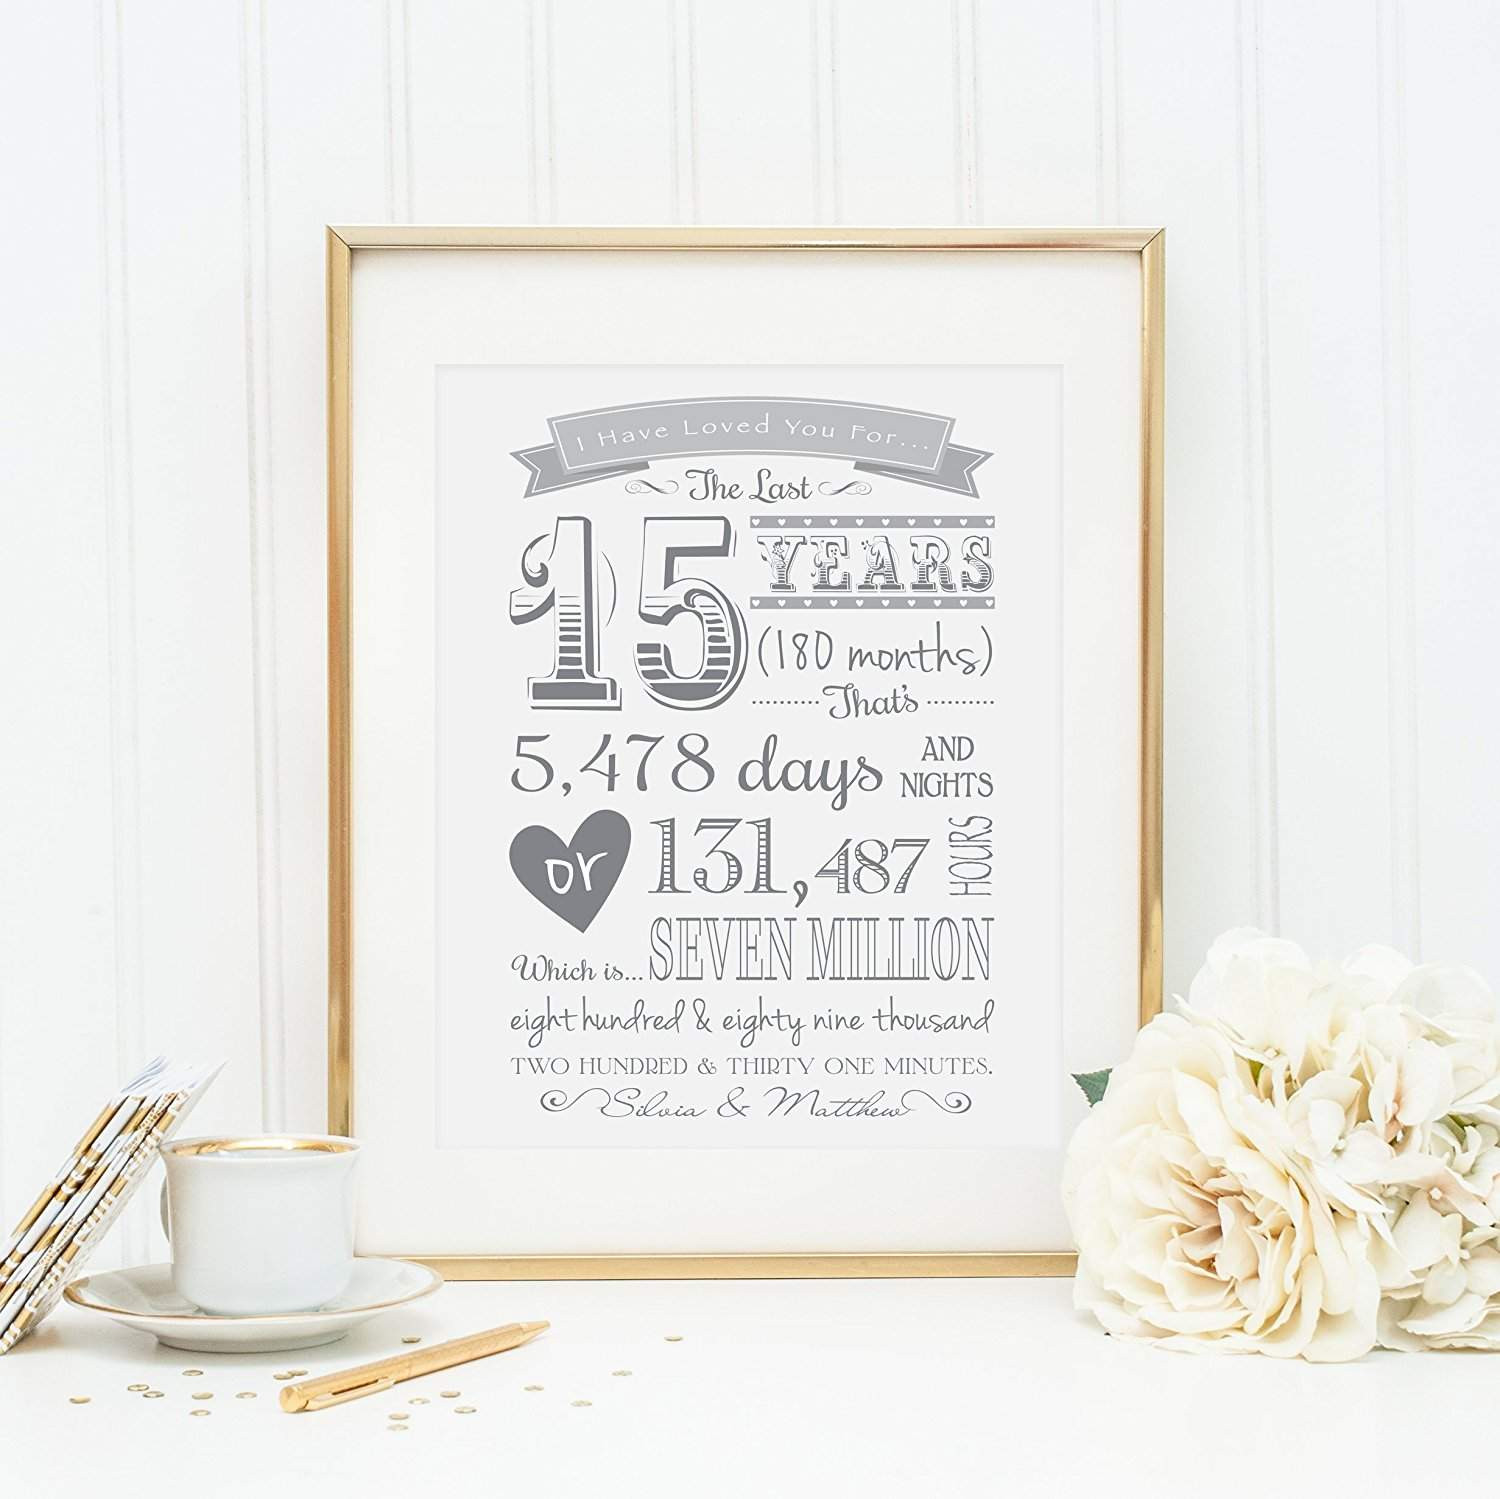 Wedding Gift Ideas For Groom From Bride
 Best Wedding Day Gift Ideas From the Groom to the Bride